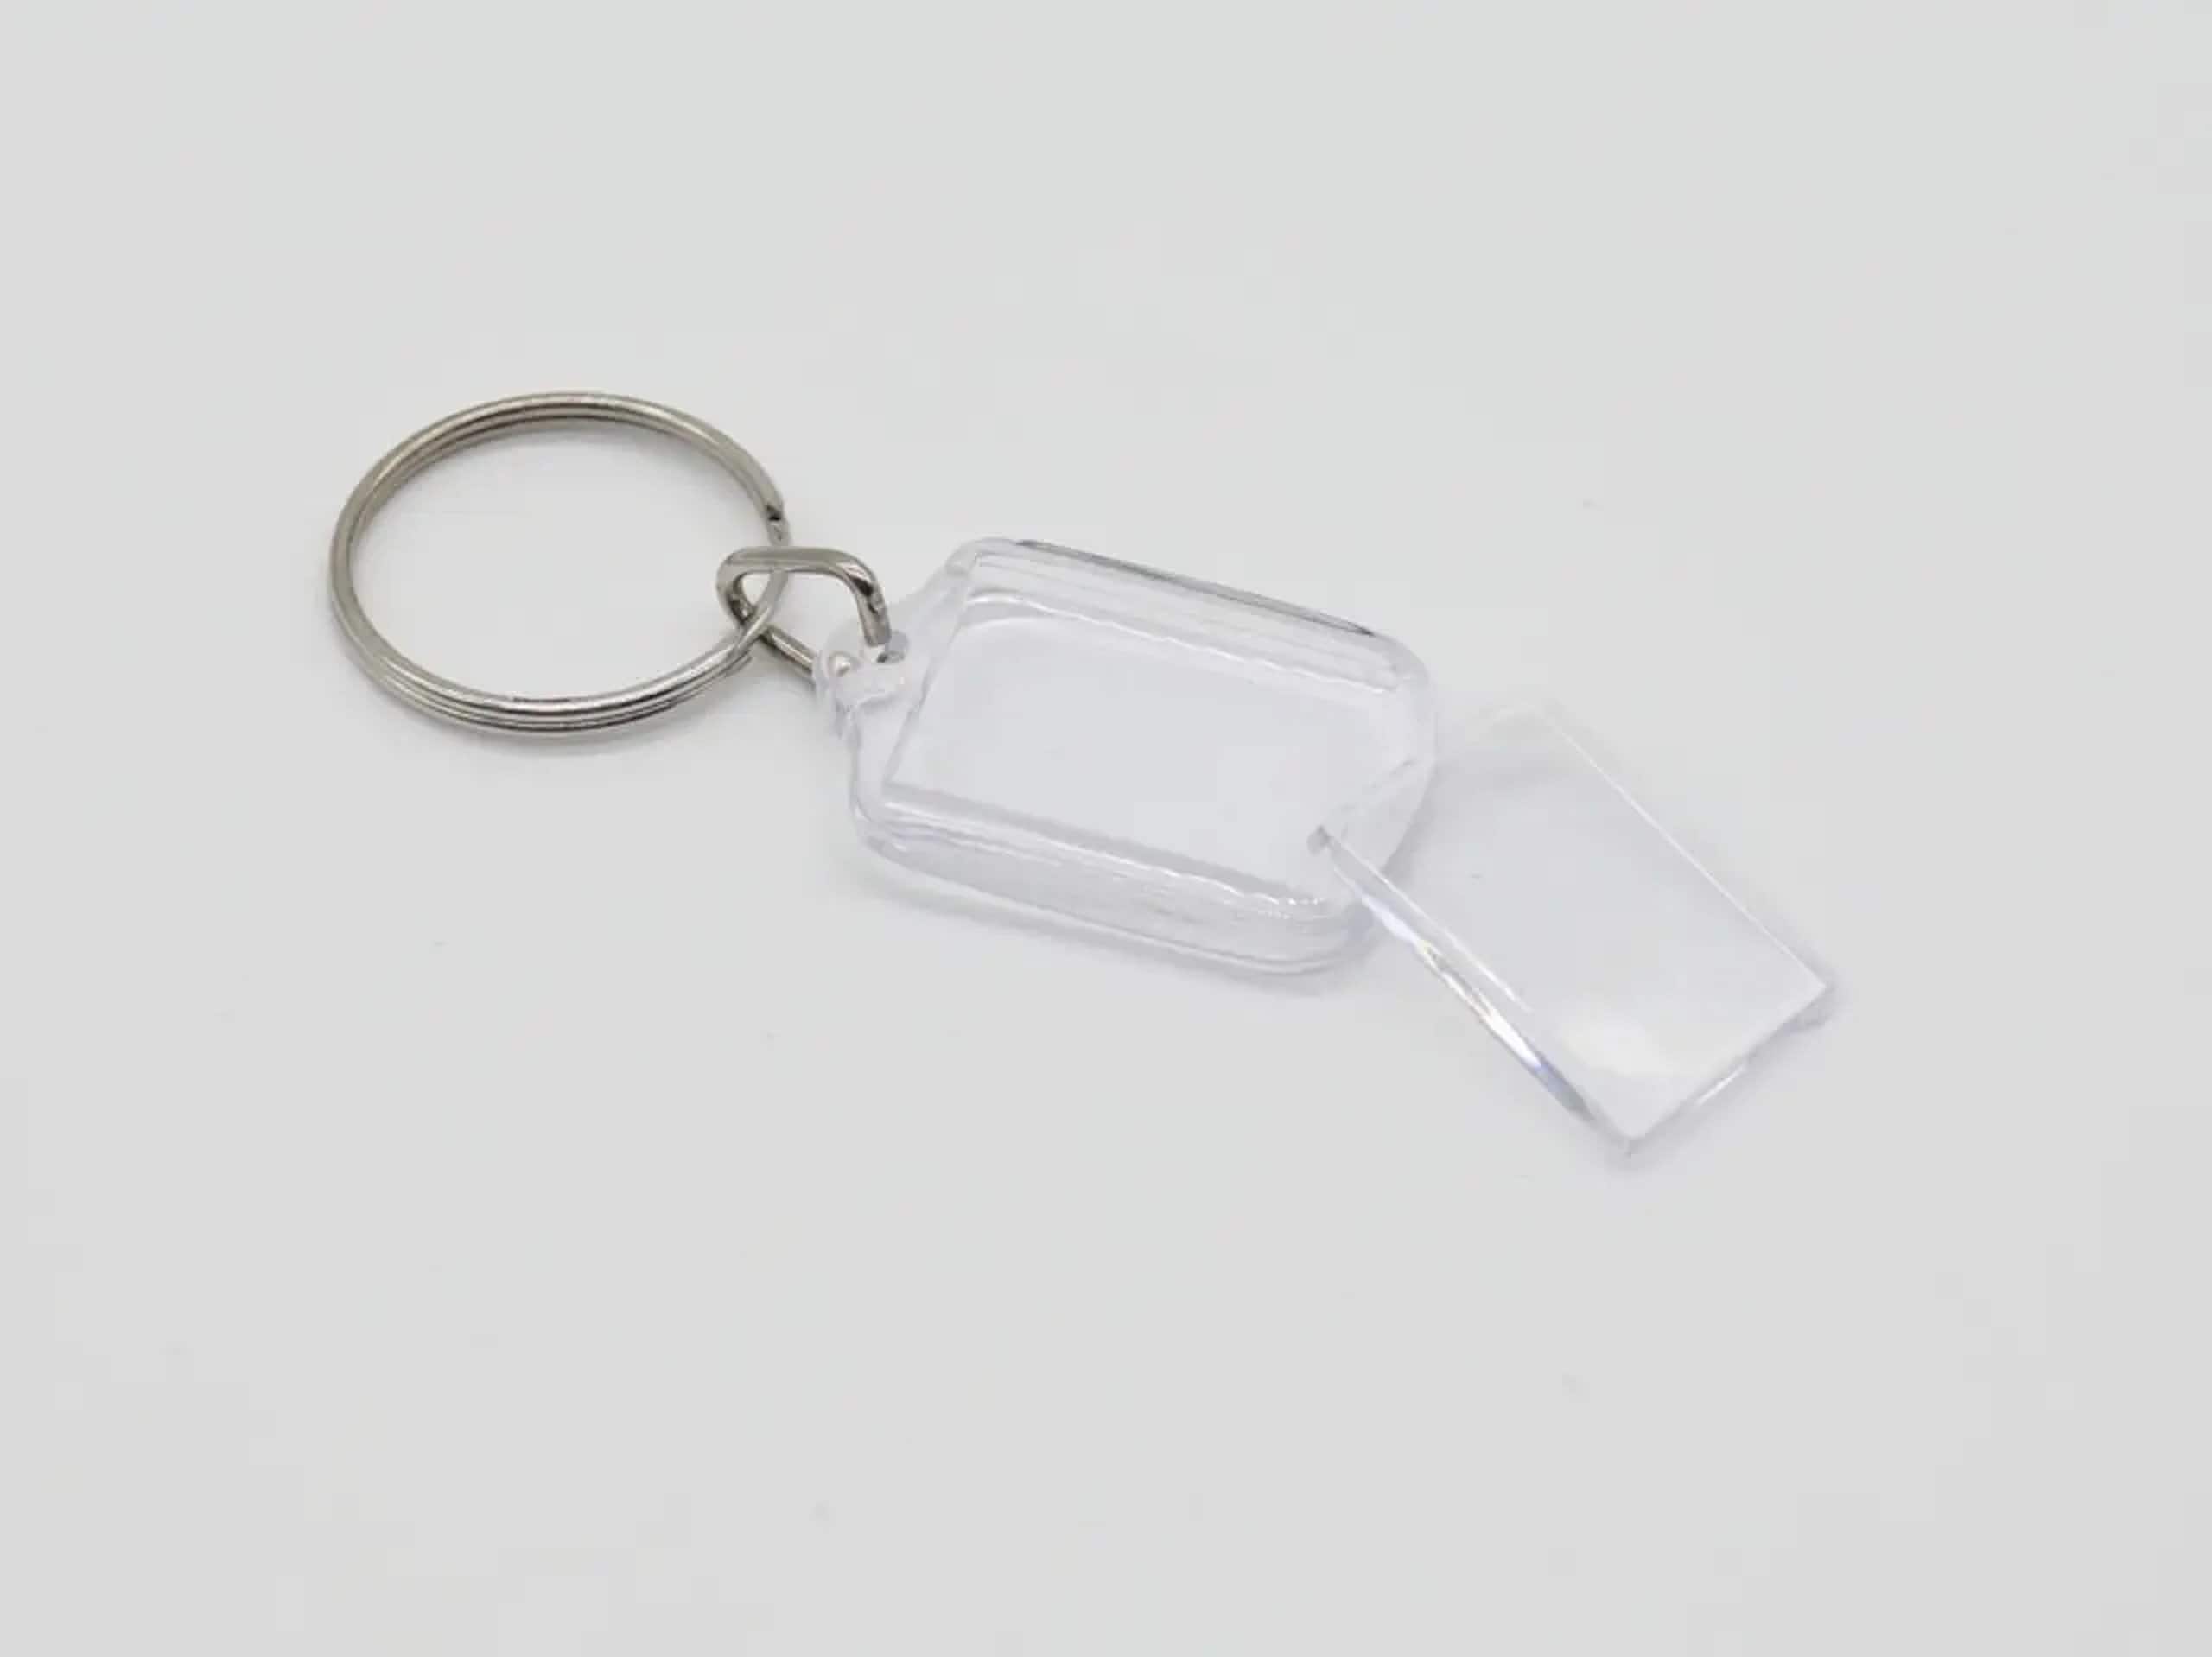 Acrylic Keychain Blanks 2.5, 20 Set Clear Key Chain with Open Jump Ring